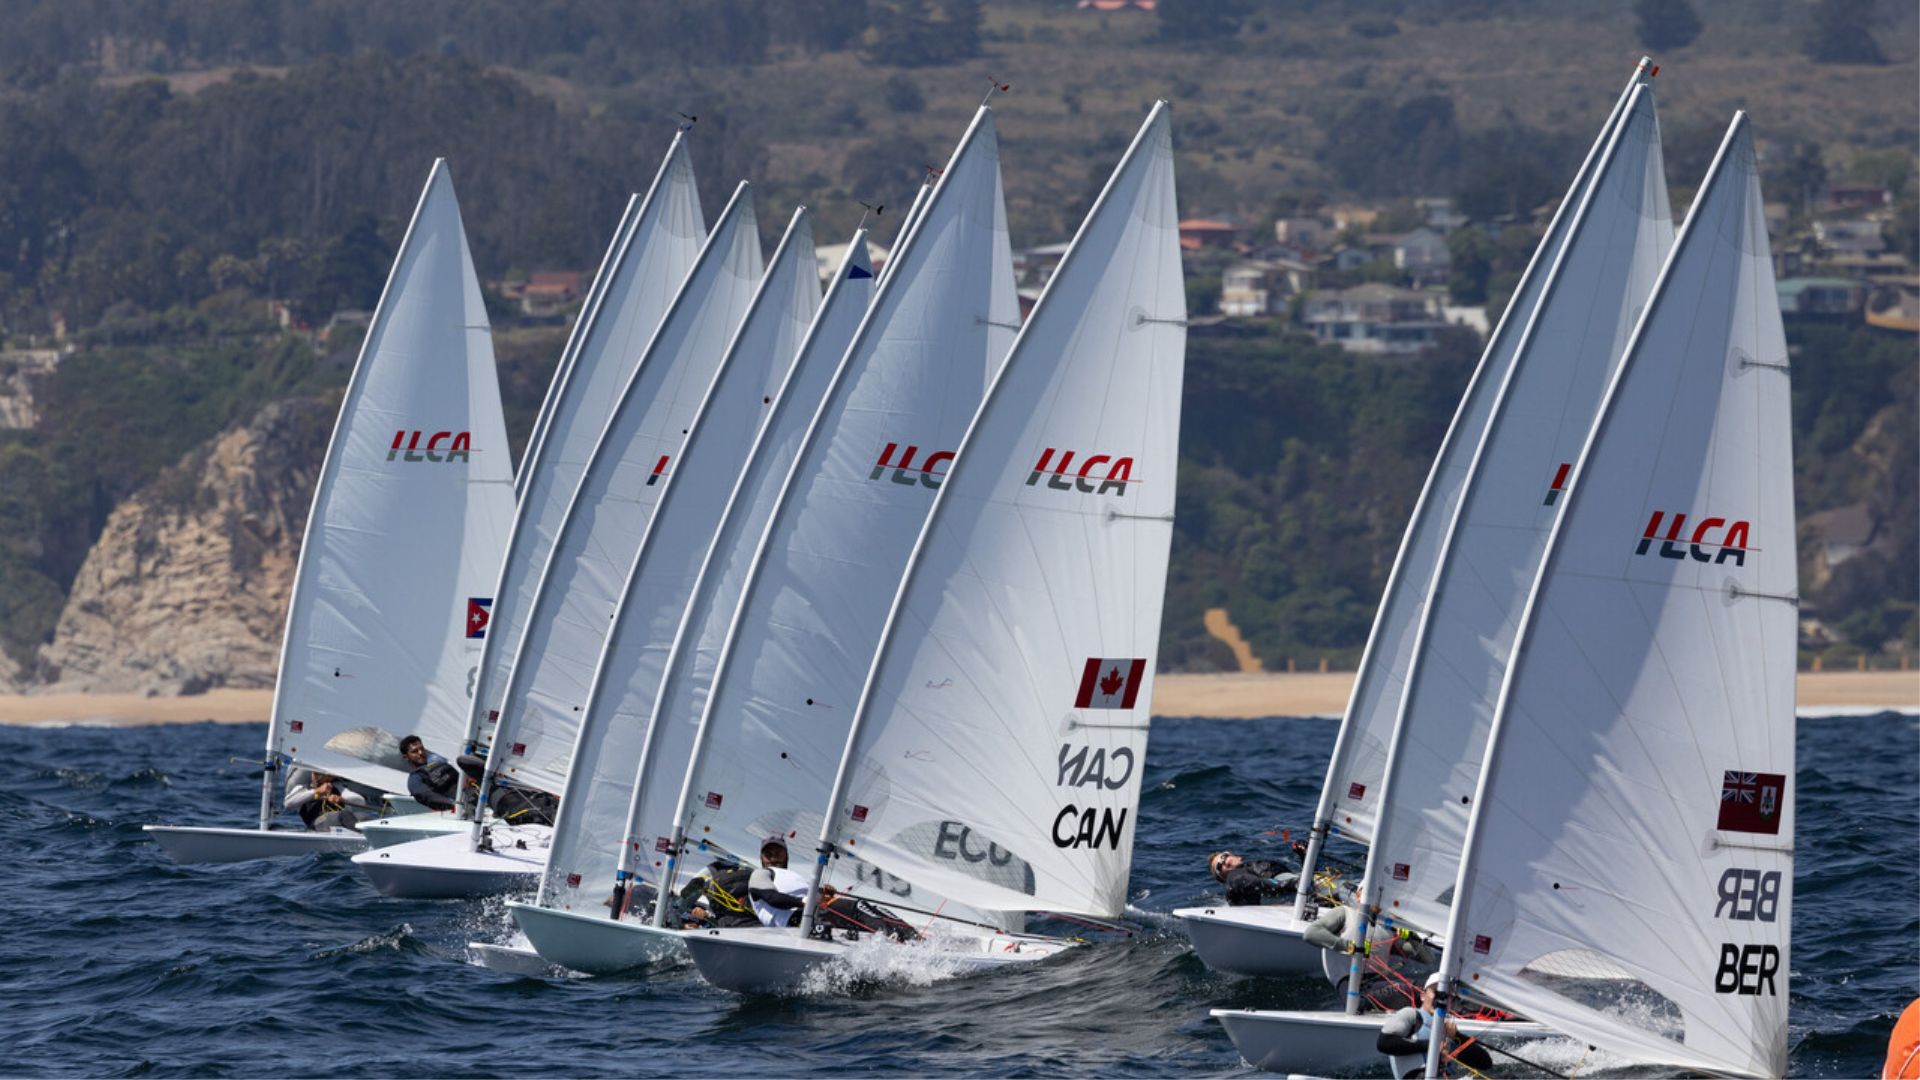 Pan American Sailing debut sees unexpected north wind